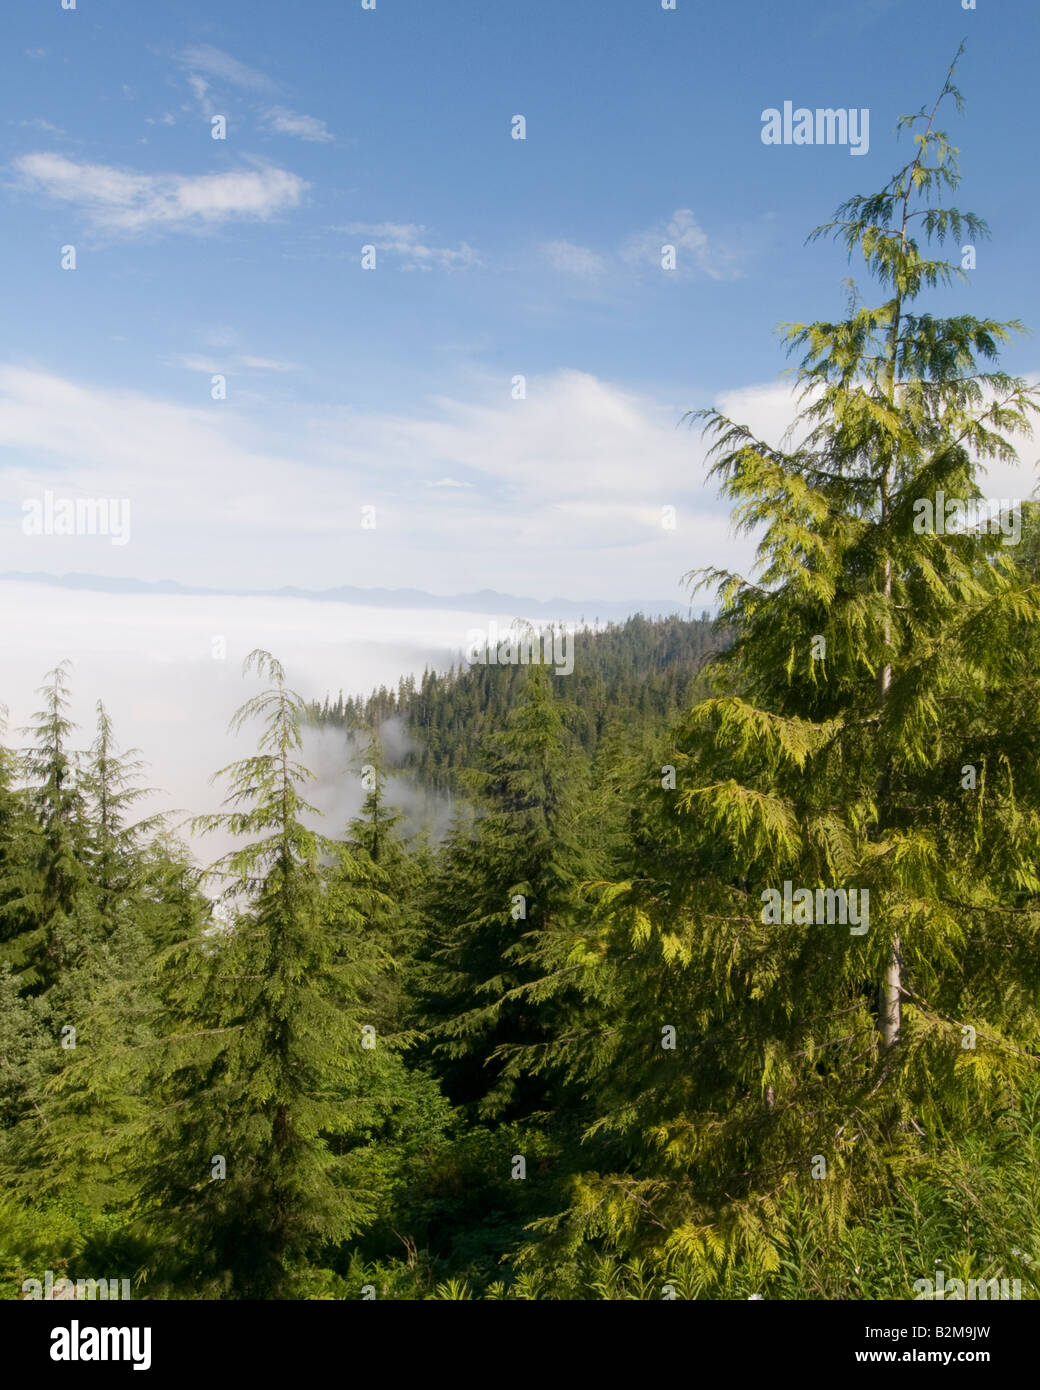 Mountain view with trees and mist or low clouds hanging on the top Stock Photo